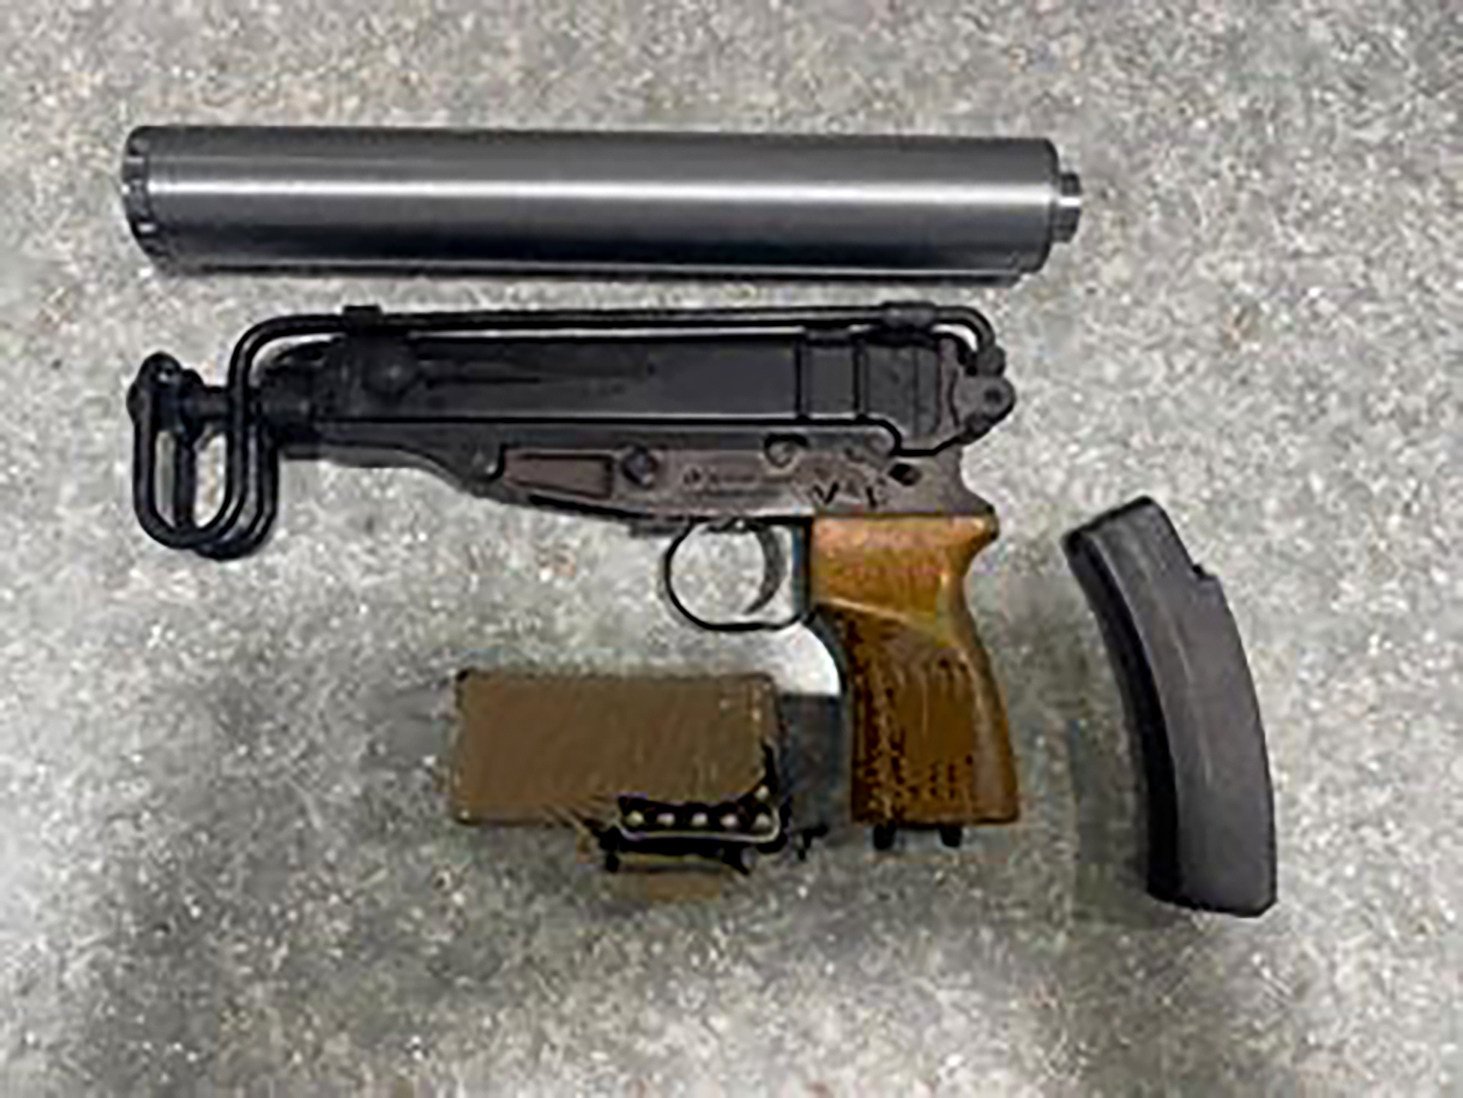 The Czech-made submachine gun had a sound suppressor with it. Photo: Hong Kong Police